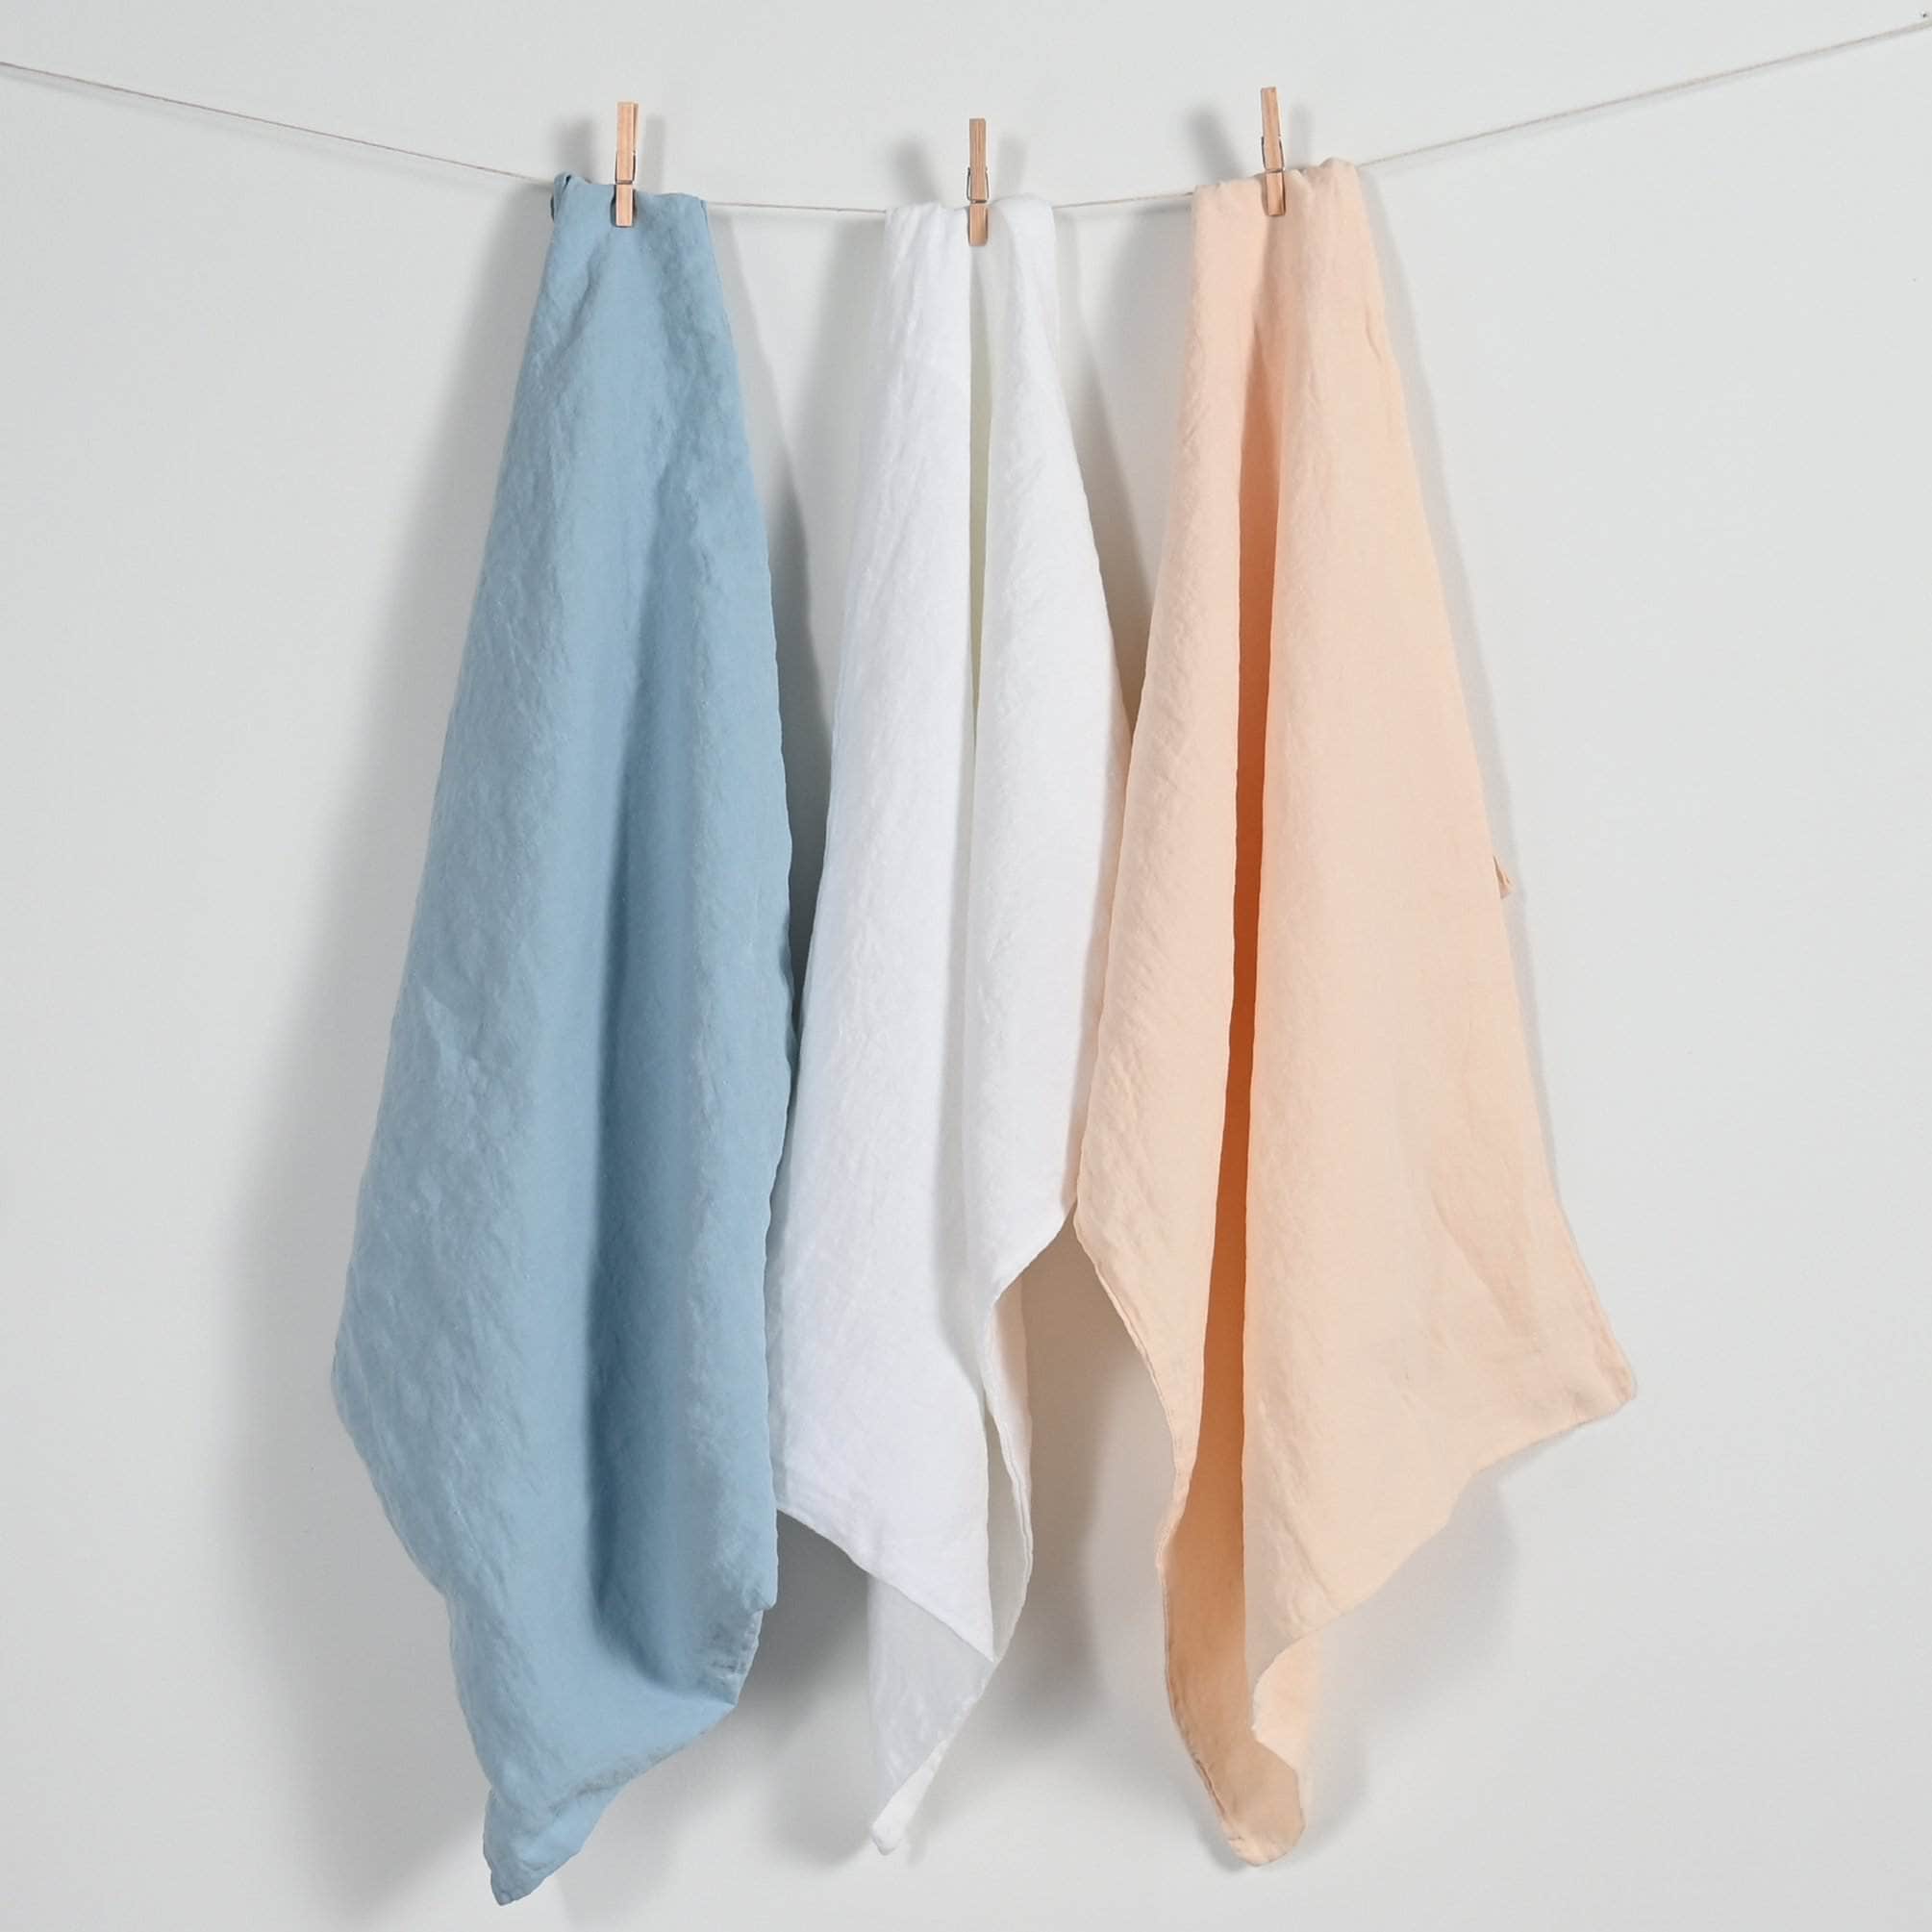 Hanging Linen Pillowcases in Blue Mist, White and Pearl